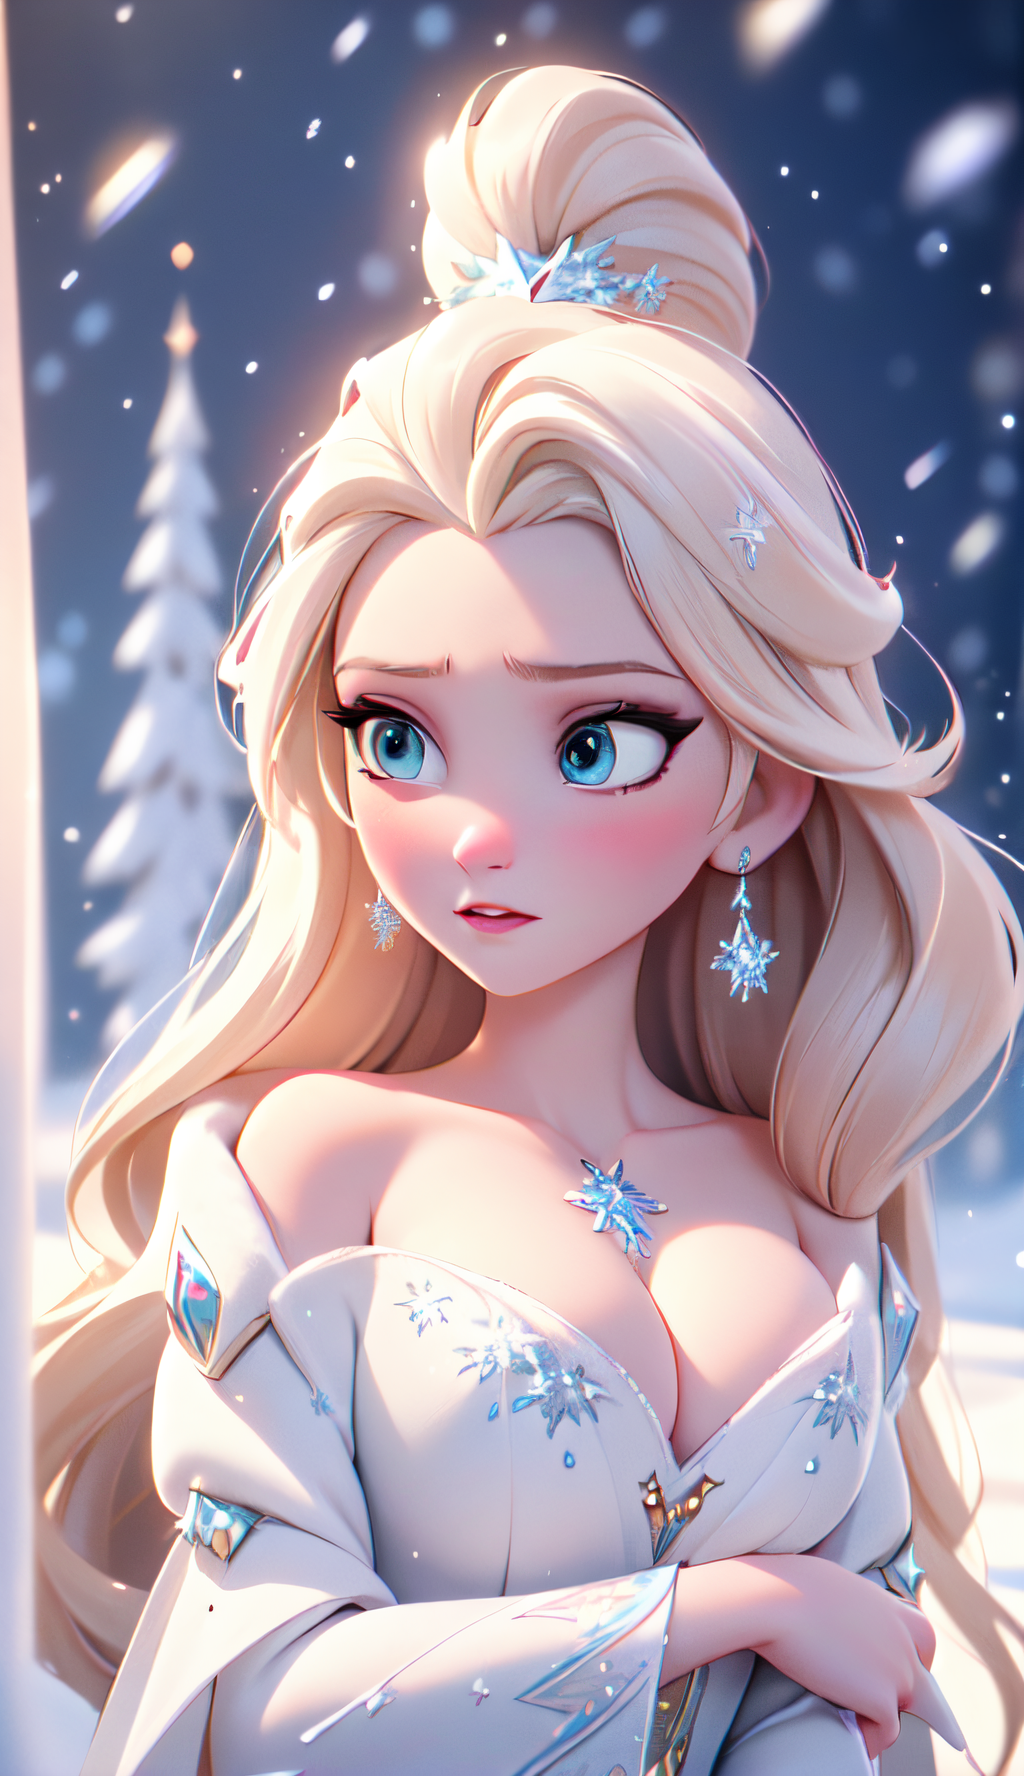 General 1024x1776 snow portrait display necklace pale women boobs Frozen 2 Frozen (movie) AI art looking away outdoors women outdoors cleavage parted lips earring hair ornament snowing trees dress off shoulder bare shoulders Disney princesses Disney digital art